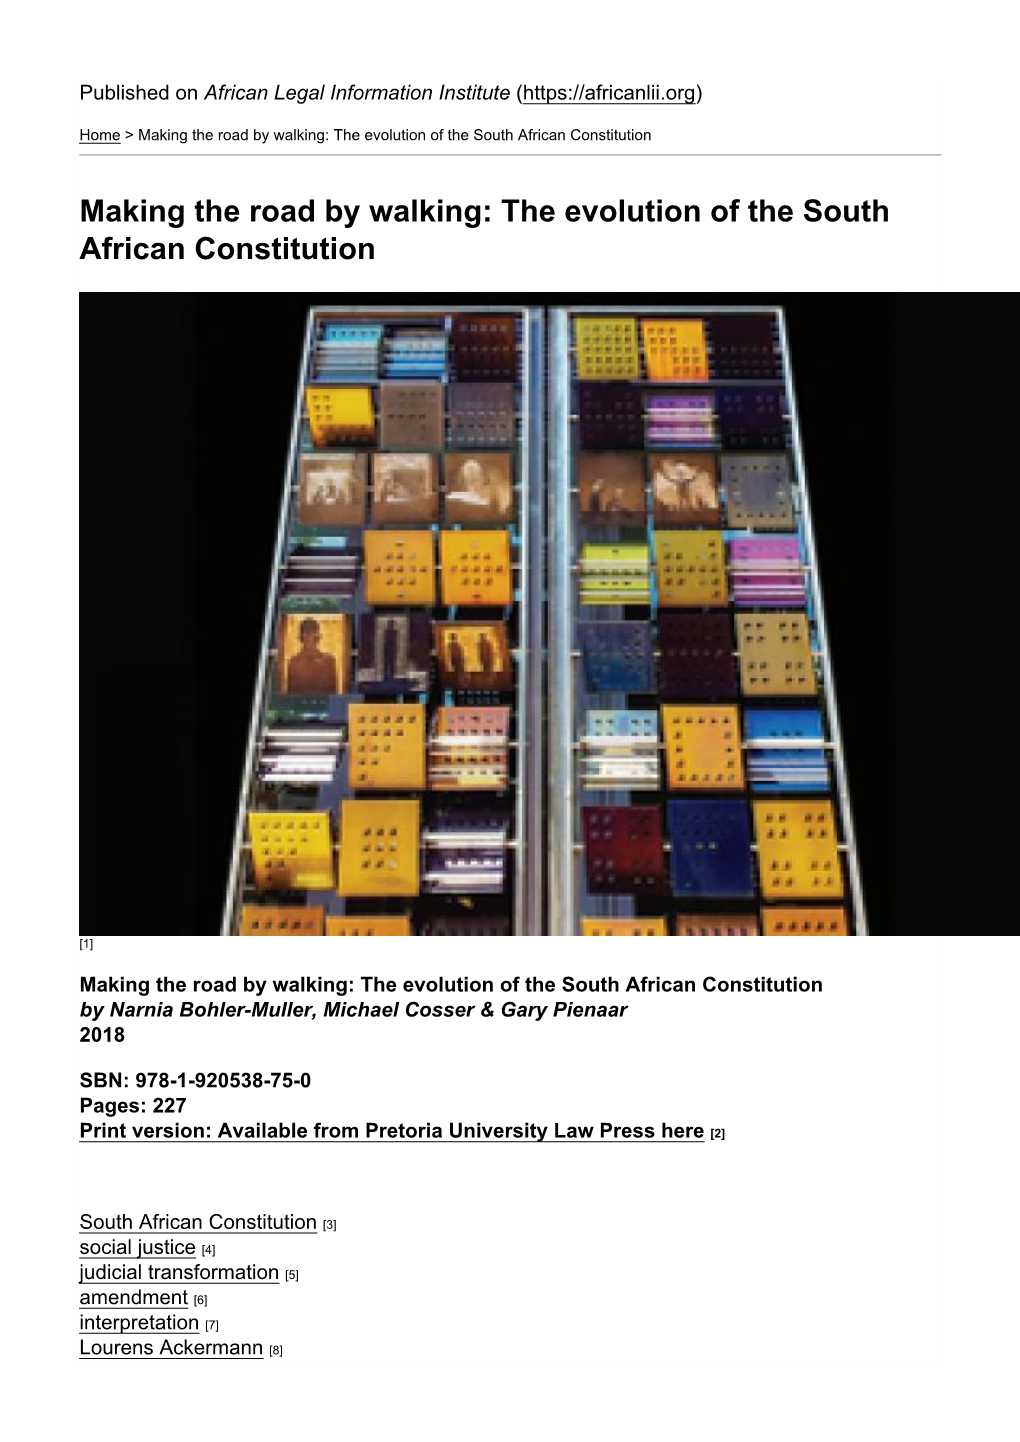 The Evolution of the South African Constitution